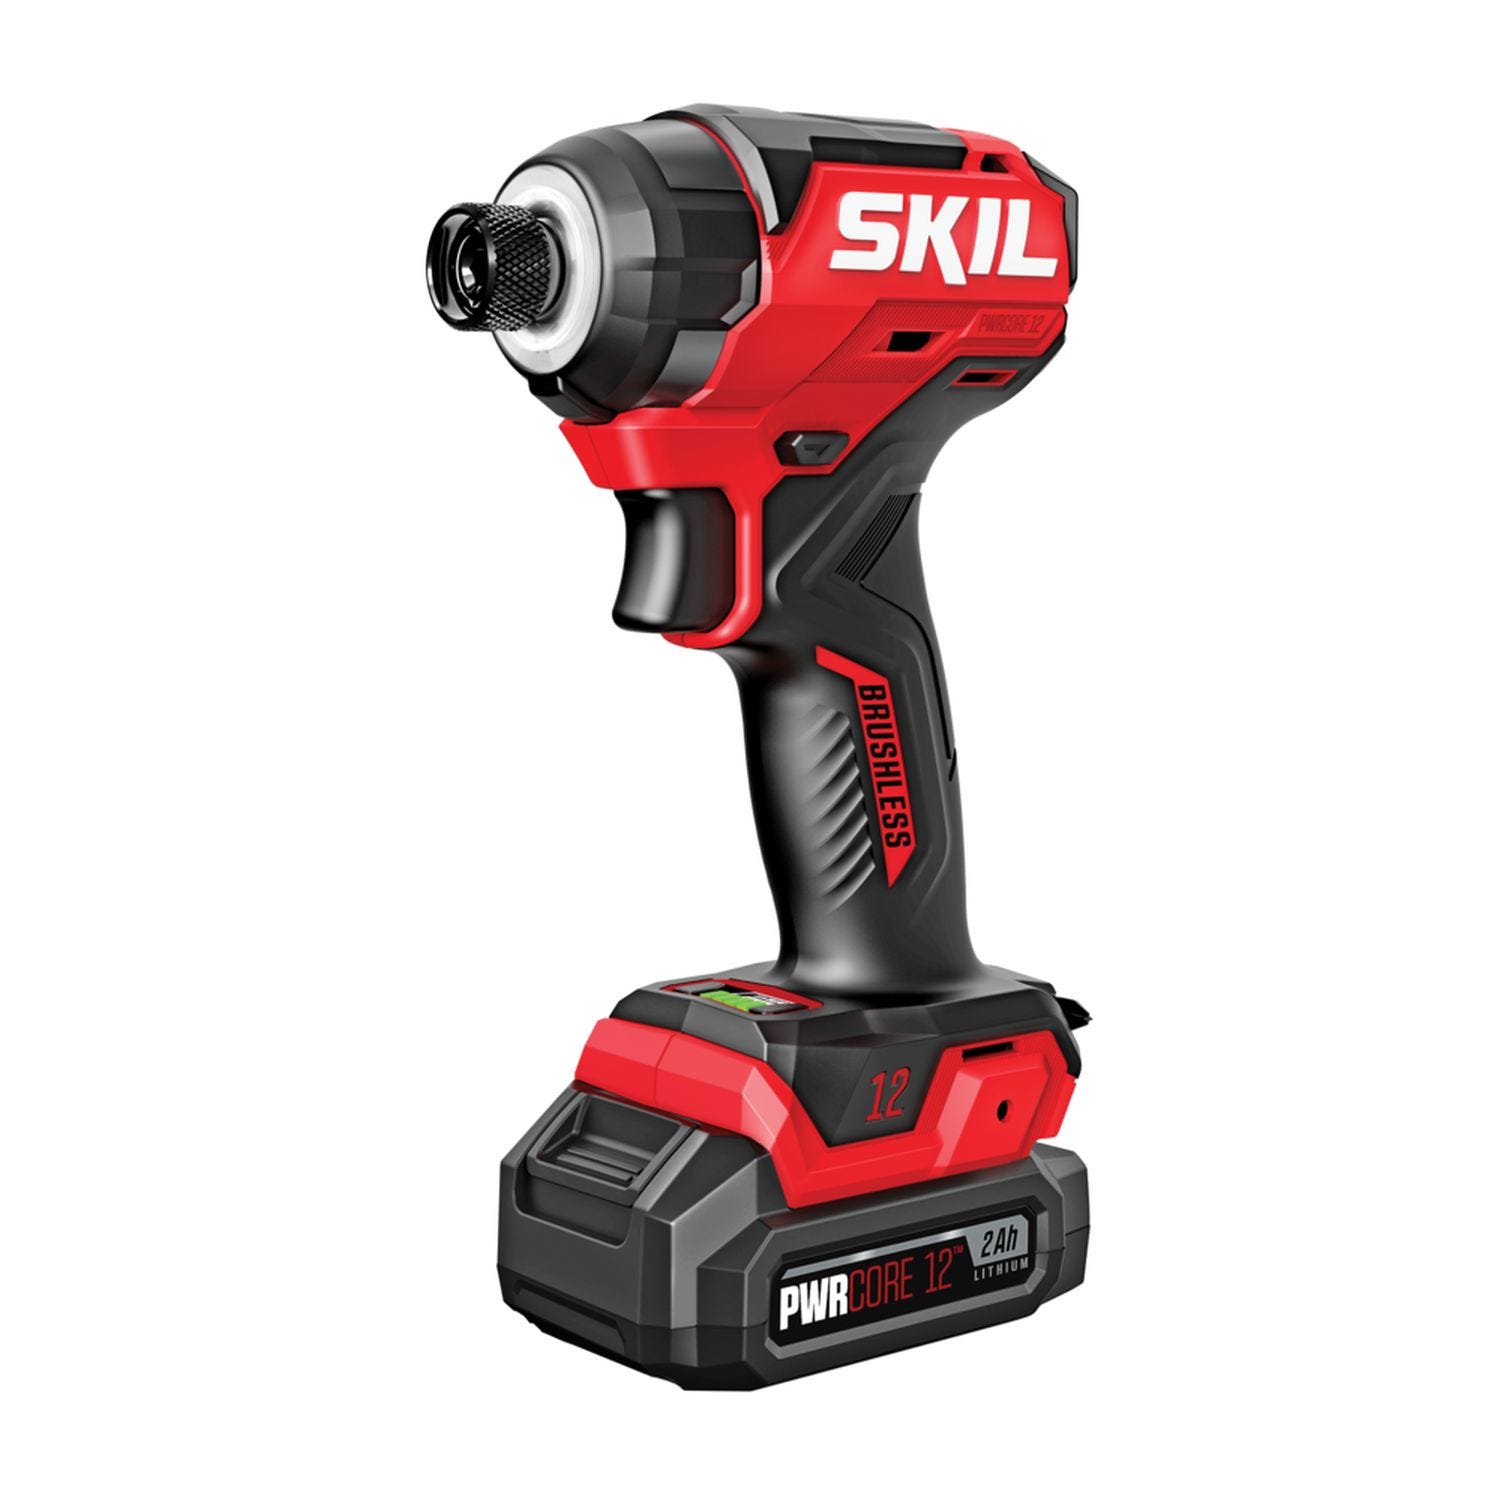 SKIL ID6744A-10 PWR CORE 12 Brushless 12V 1/4 IN. Hex Impact